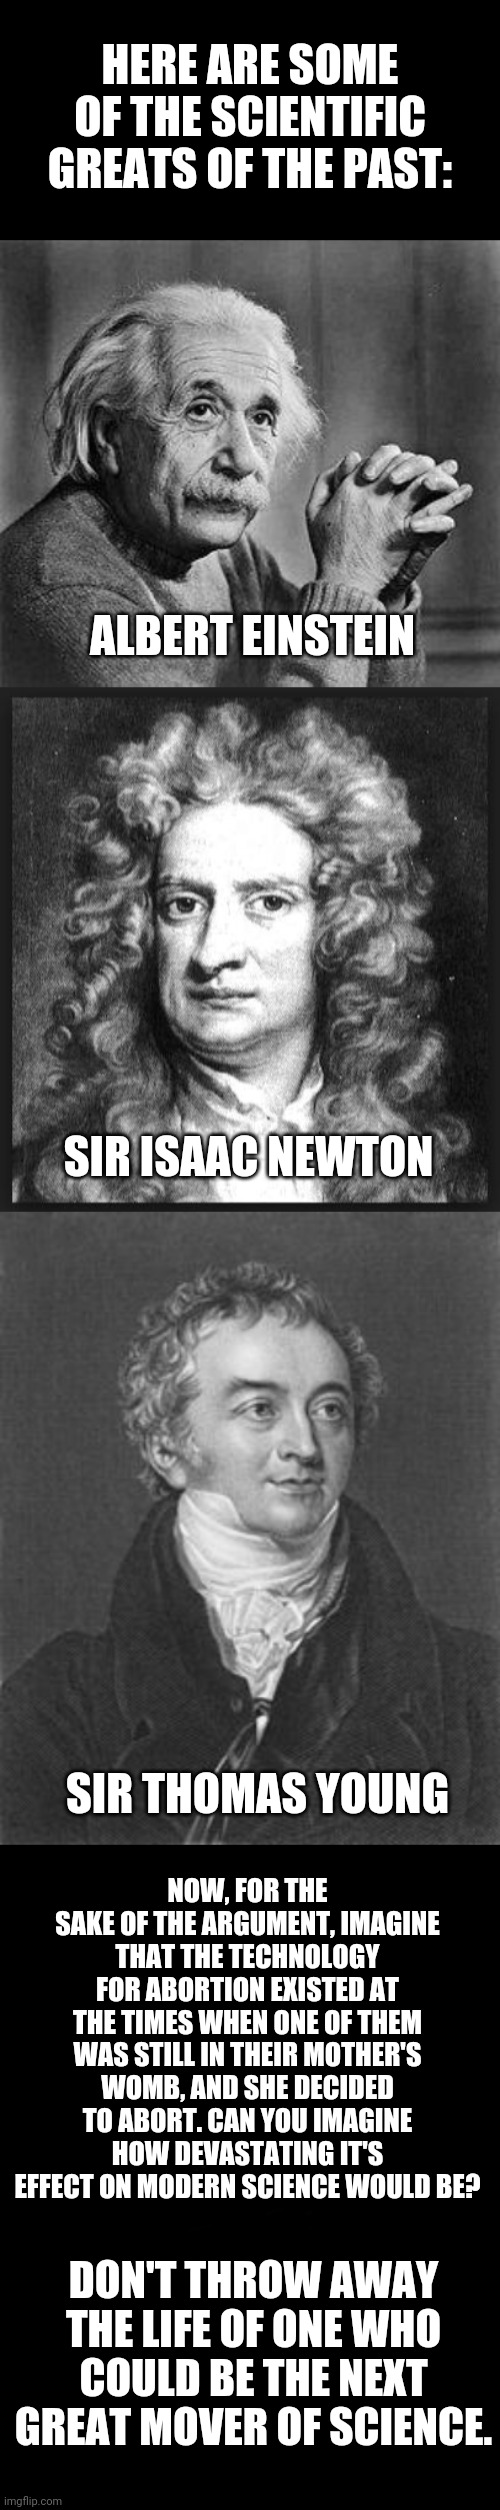 HERE ARE SOME OF THE SCIENTIFIC GREATS OF THE PAST:; ALBERT EINSTEIN; SIR ISAAC NEWTON; SIR THOMAS YOUNG; NOW, FOR THE SAKE OF THE ARGUMENT, IMAGINE THAT THE TECHNOLOGY FOR ABORTION EXISTED AT THE TIMES WHEN ONE OF THEM WAS STILL IN THEIR MOTHER'S WOMB, AND SHE DECIDED TO ABORT. CAN YOU IMAGINE HOW DEVASTATING IT'S EFFECT ON MODERN SCIENCE WOULD BE? DON'T THROW AWAY THE LIFE OF ONE WHO COULD BE THE NEXT GREAT MOVER OF SCIENCE. | image tagged in albert einstein,sir isaac newton,scientists,abortion is murder | made w/ Imgflip meme maker